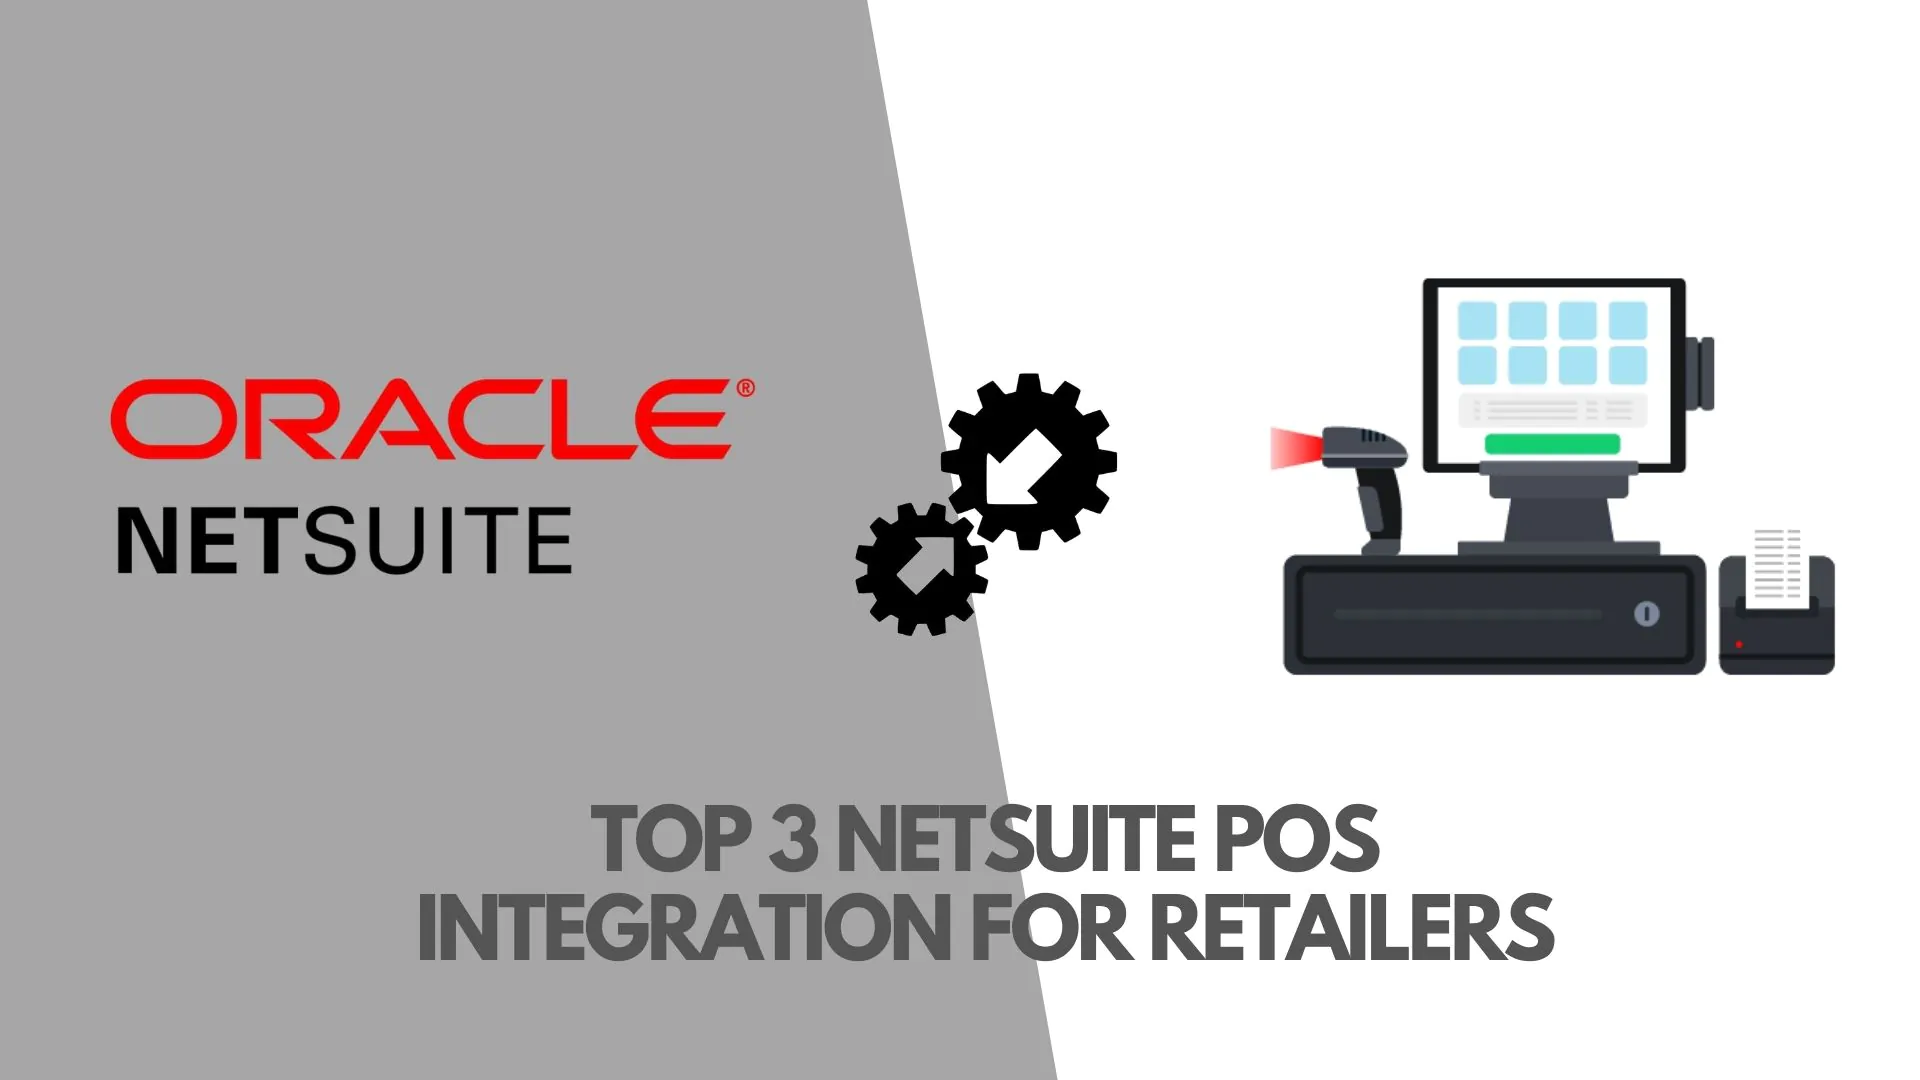 Top 3 NetSuite POS Integrations for Retailers in Business Retailers